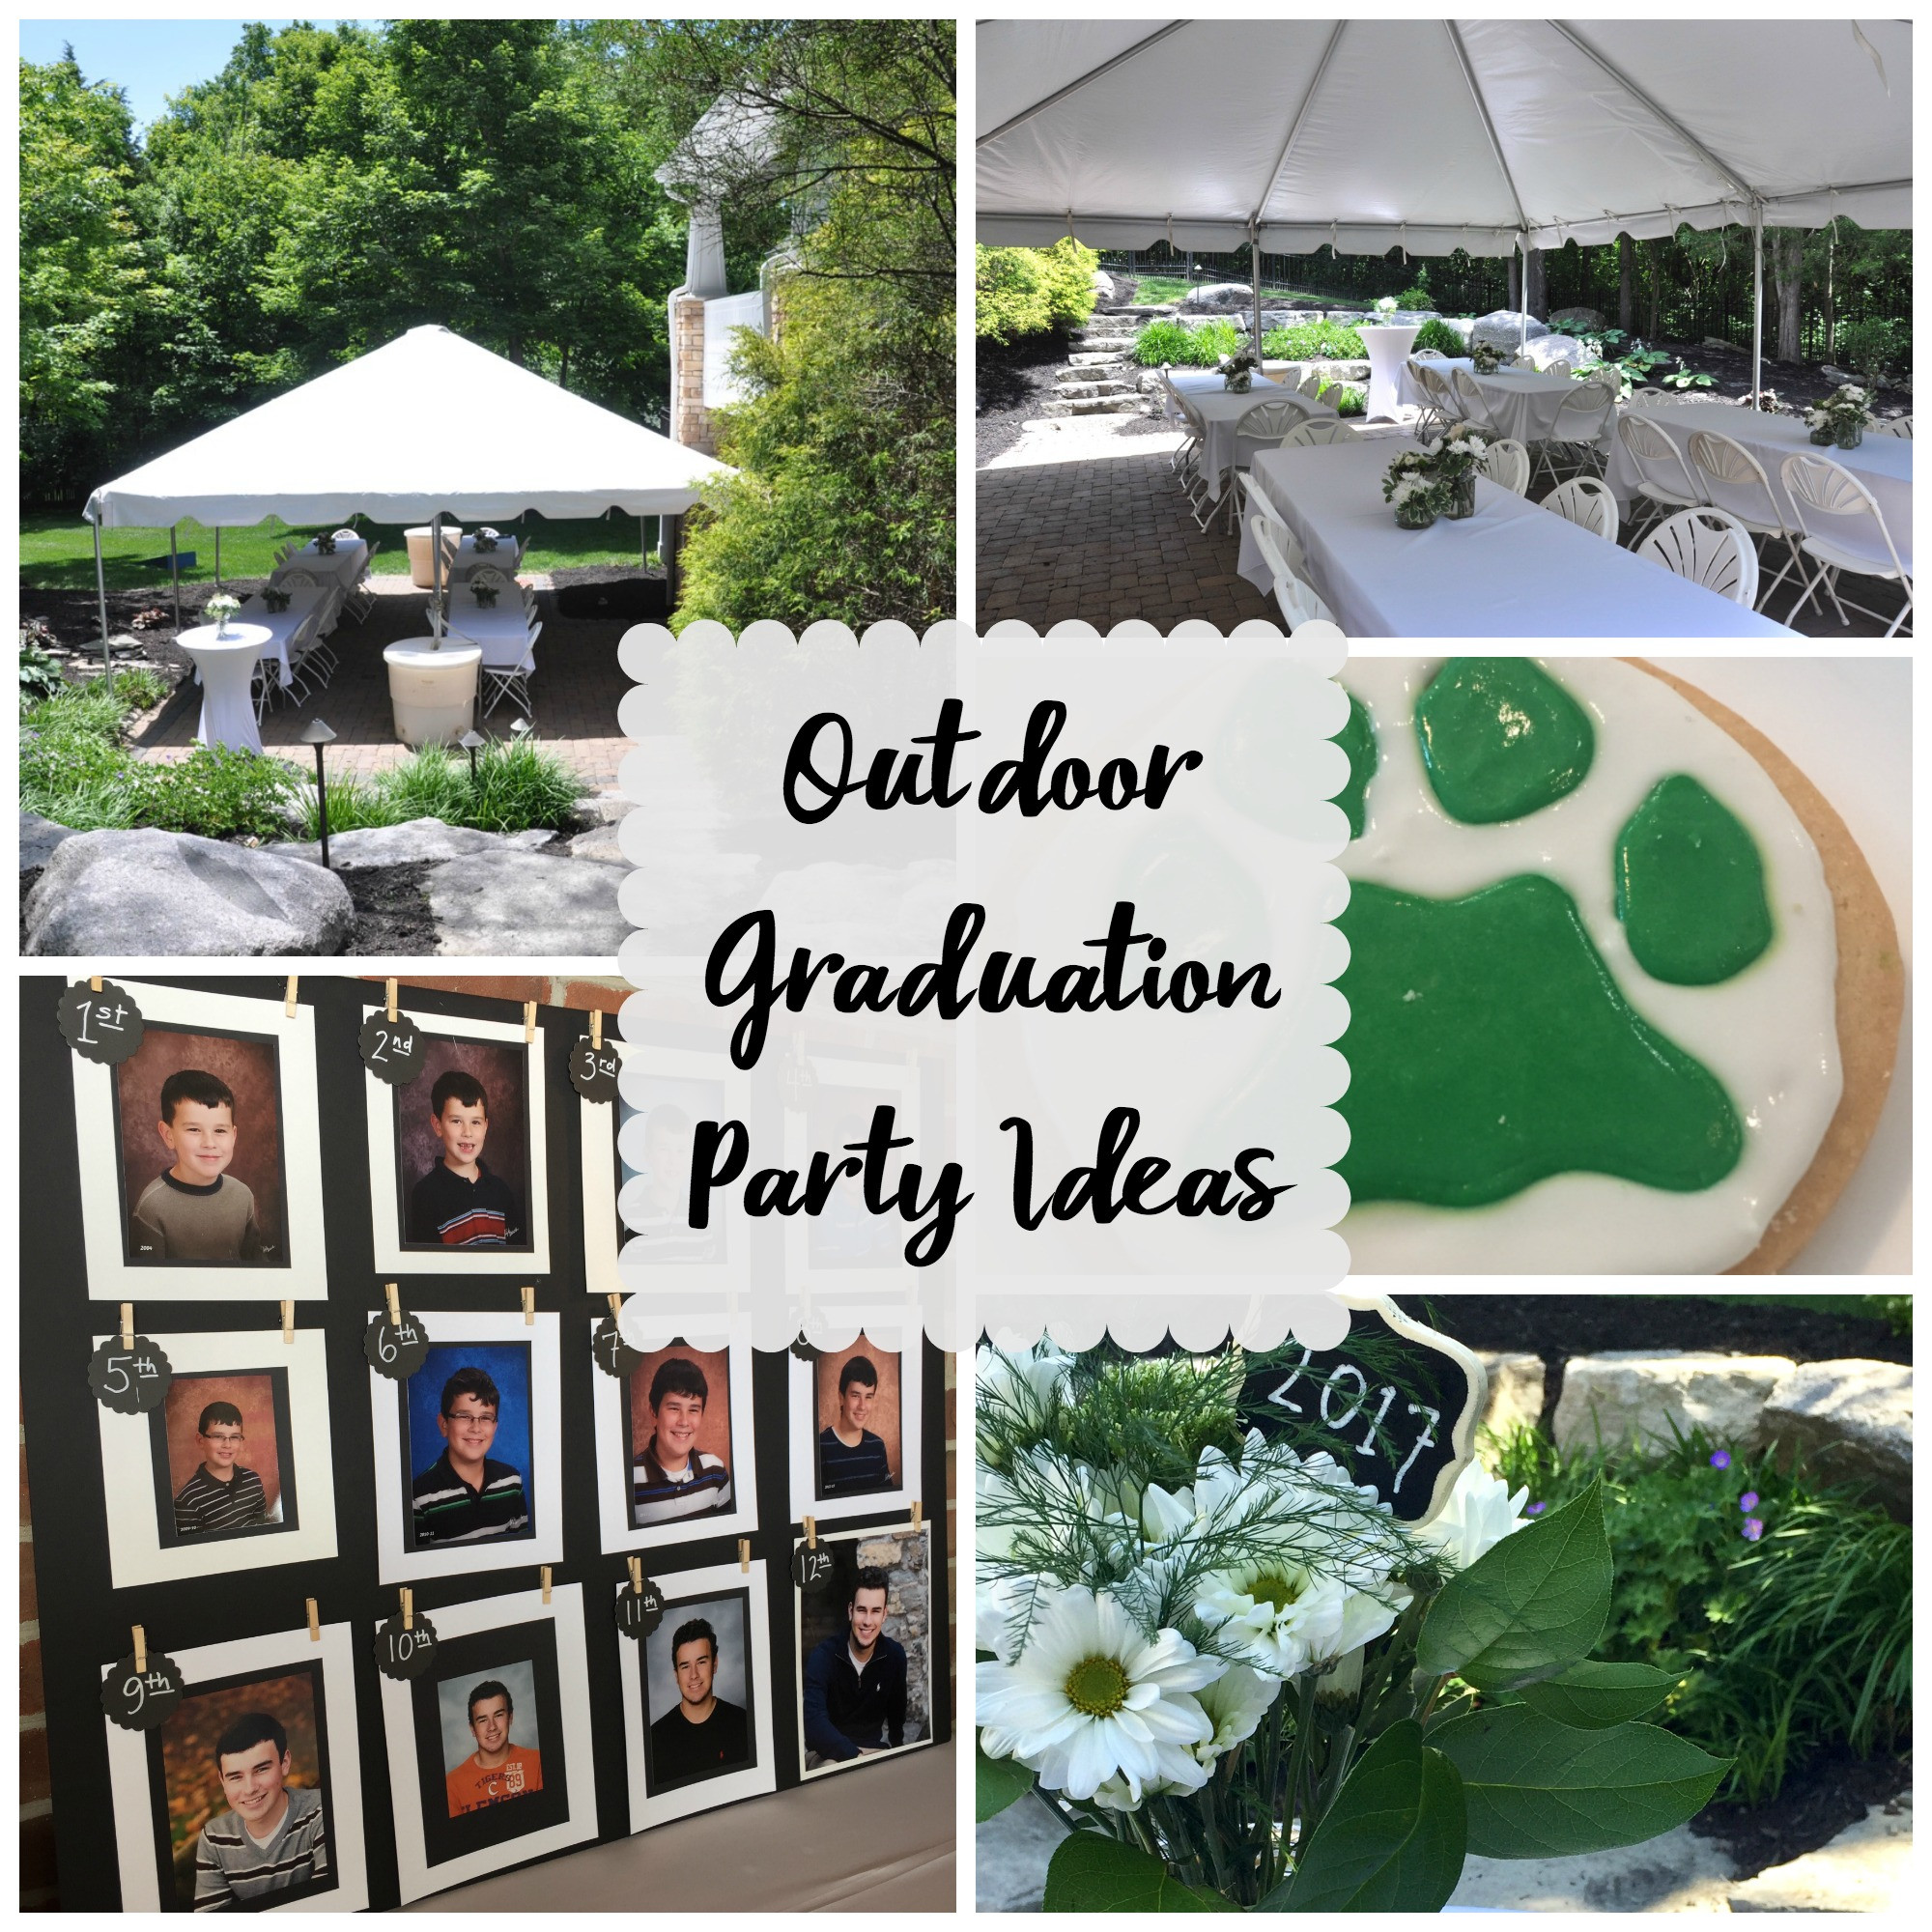 Graduation Party Picture Ideas
 Outdoor Graduation Party Evolution of Style